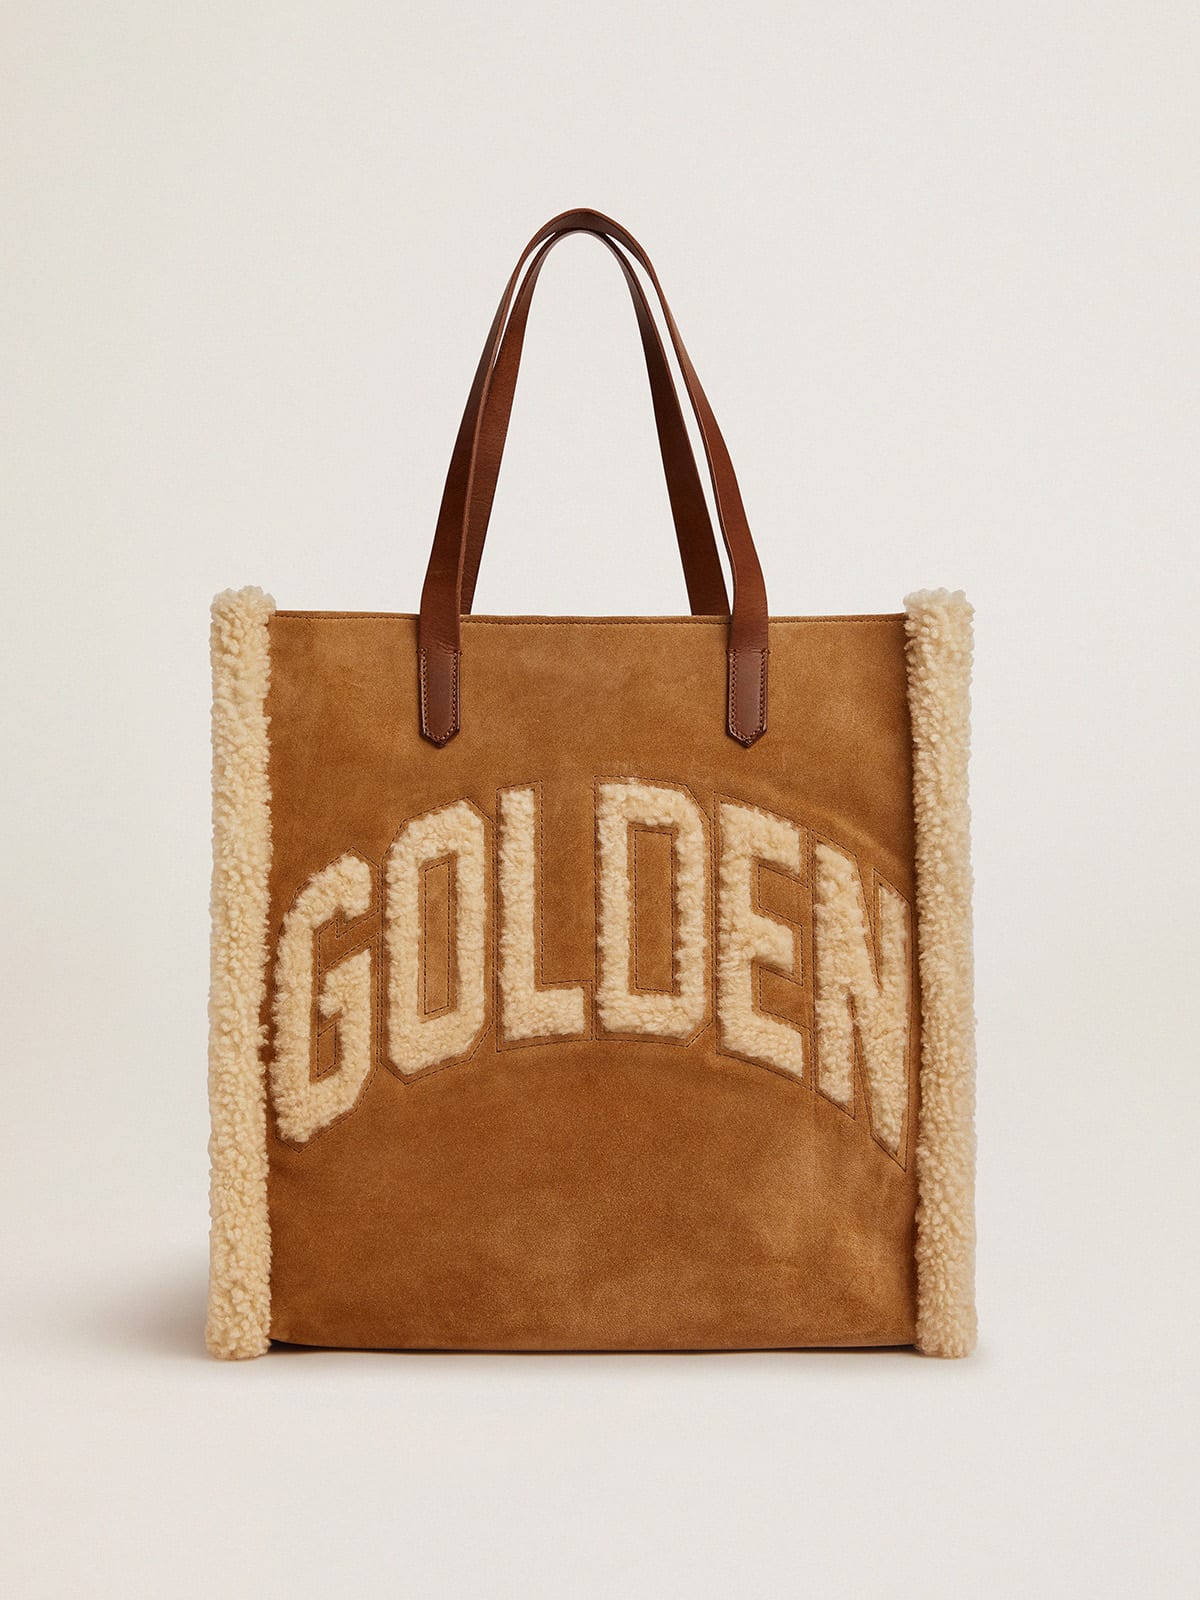 Golden Goose - North-South California Bag in suede leather with shearling in 